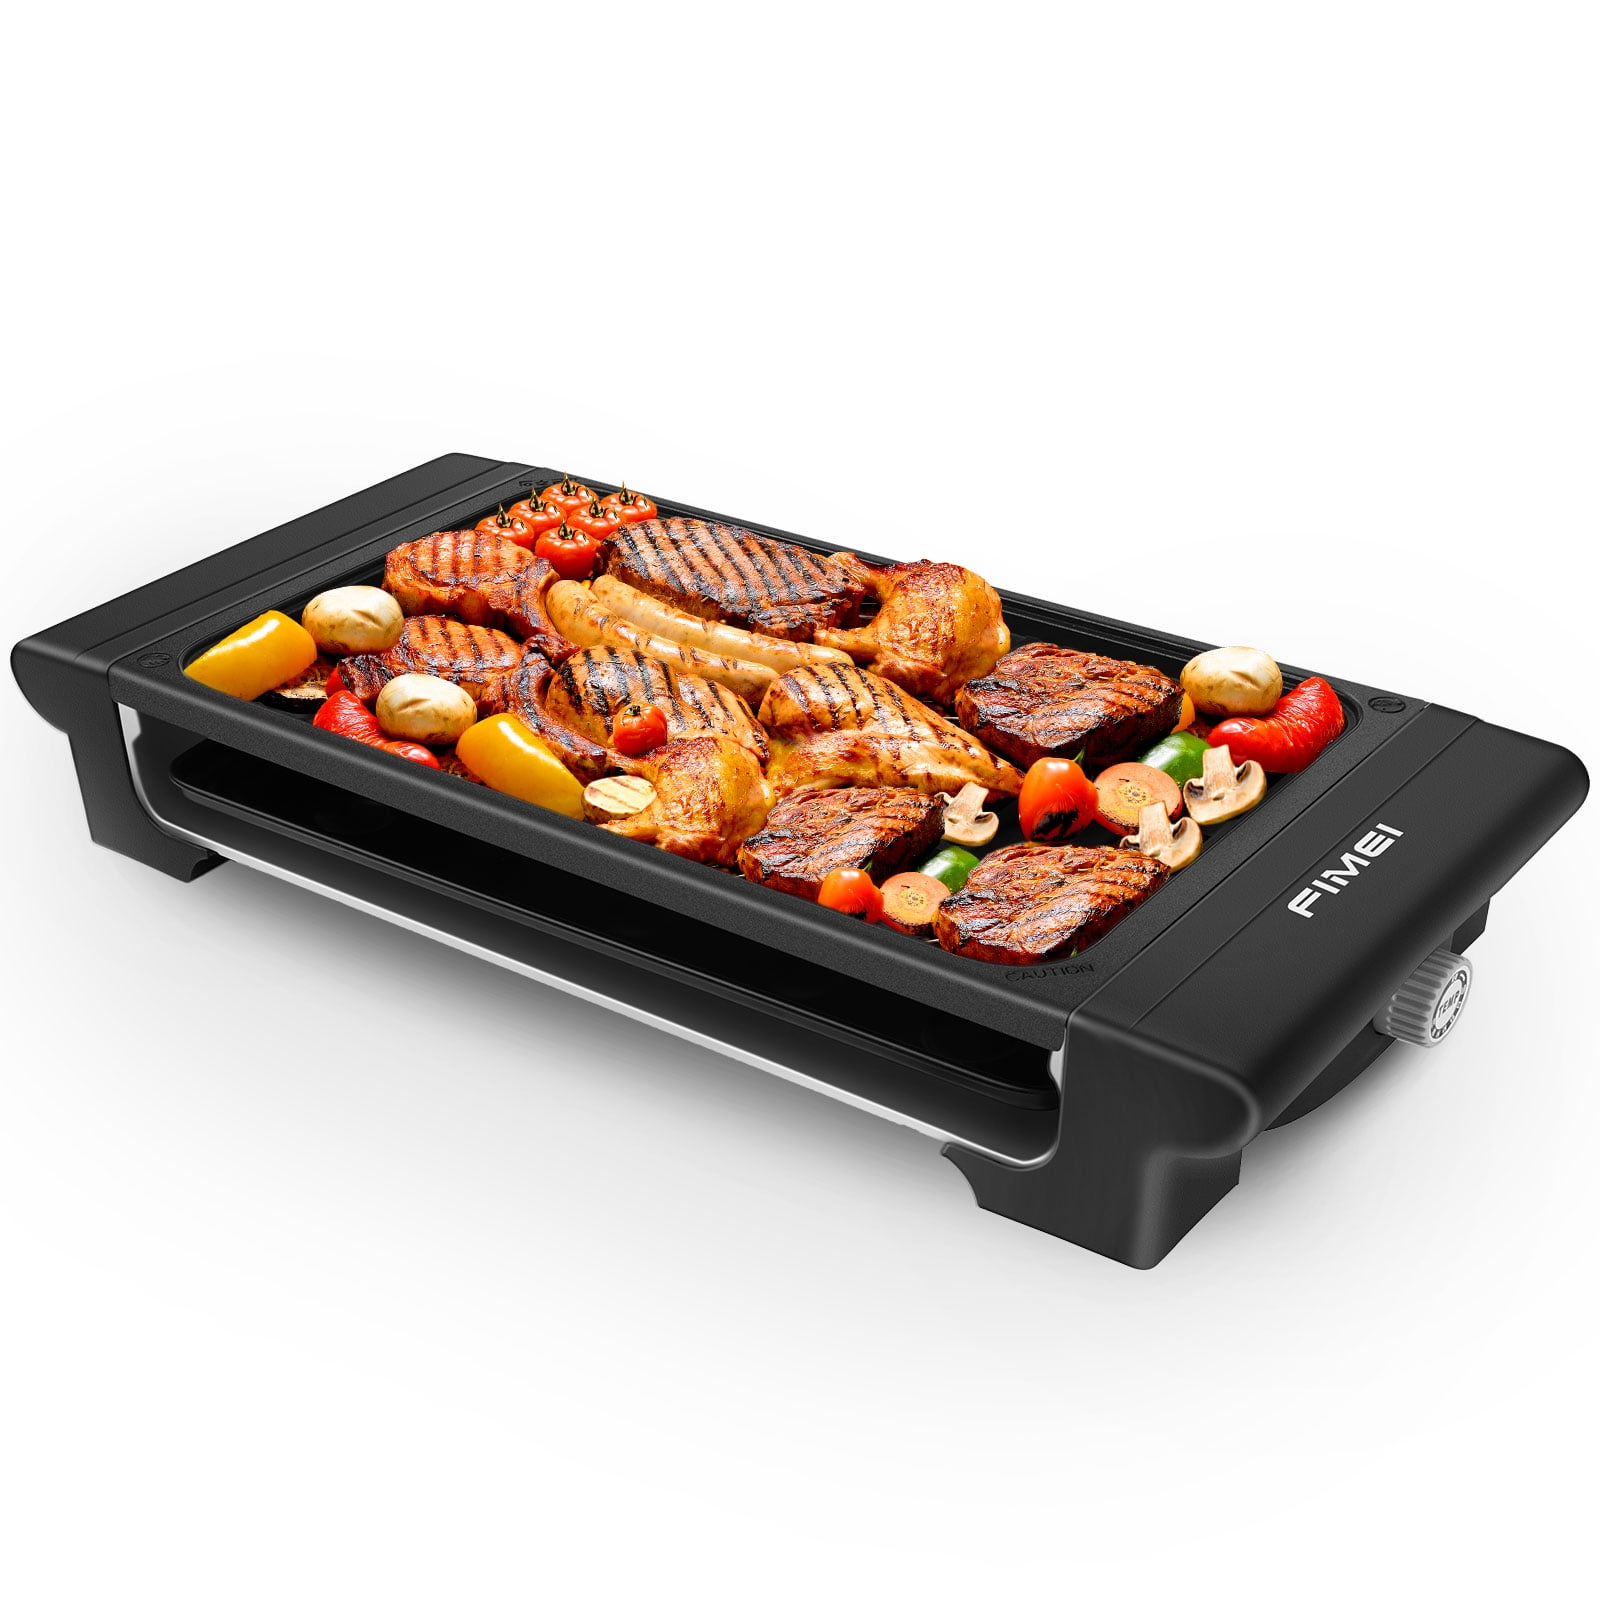 Levang 2000W Double layer Electric Grill Table Smokeless Grill Korean BBQ  Grill Indoor with Non stick plate 